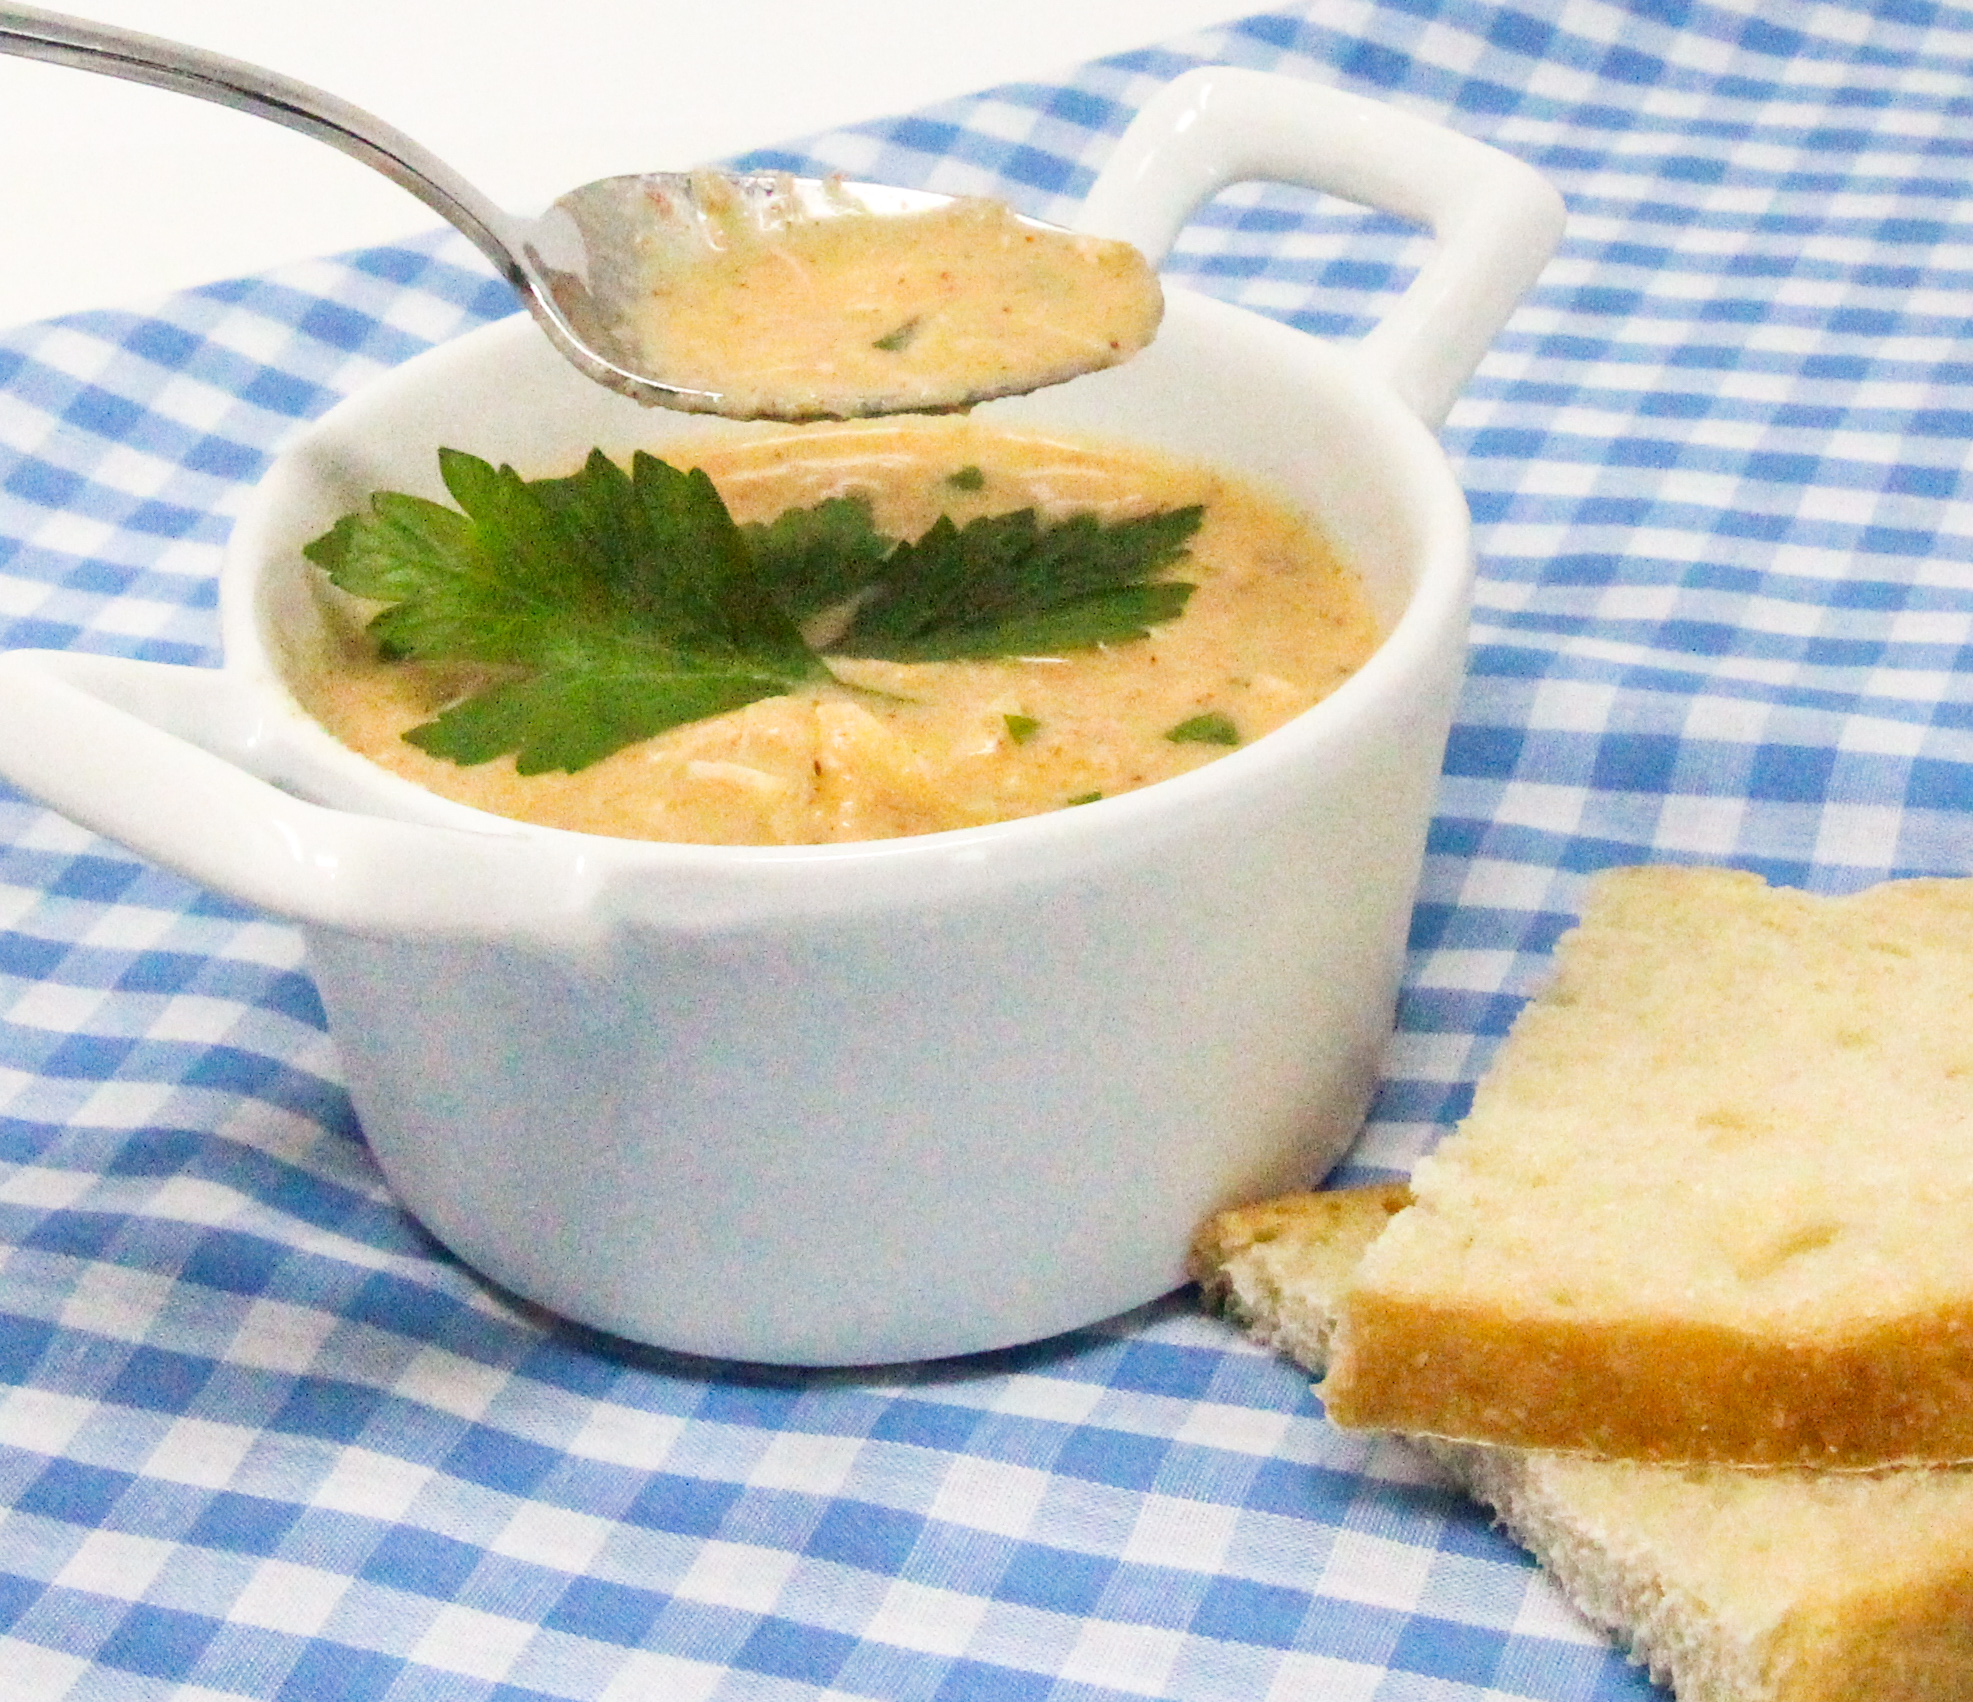 Un-Cream of Crab Soup is just as rich and decadent as if it had been made with cream. With a generous amount of crab used in the soup, the sweet, briny taste shines through. Recipe shared with permission granted by Cathy Wiley, author of CLAWS OF DEATH. 